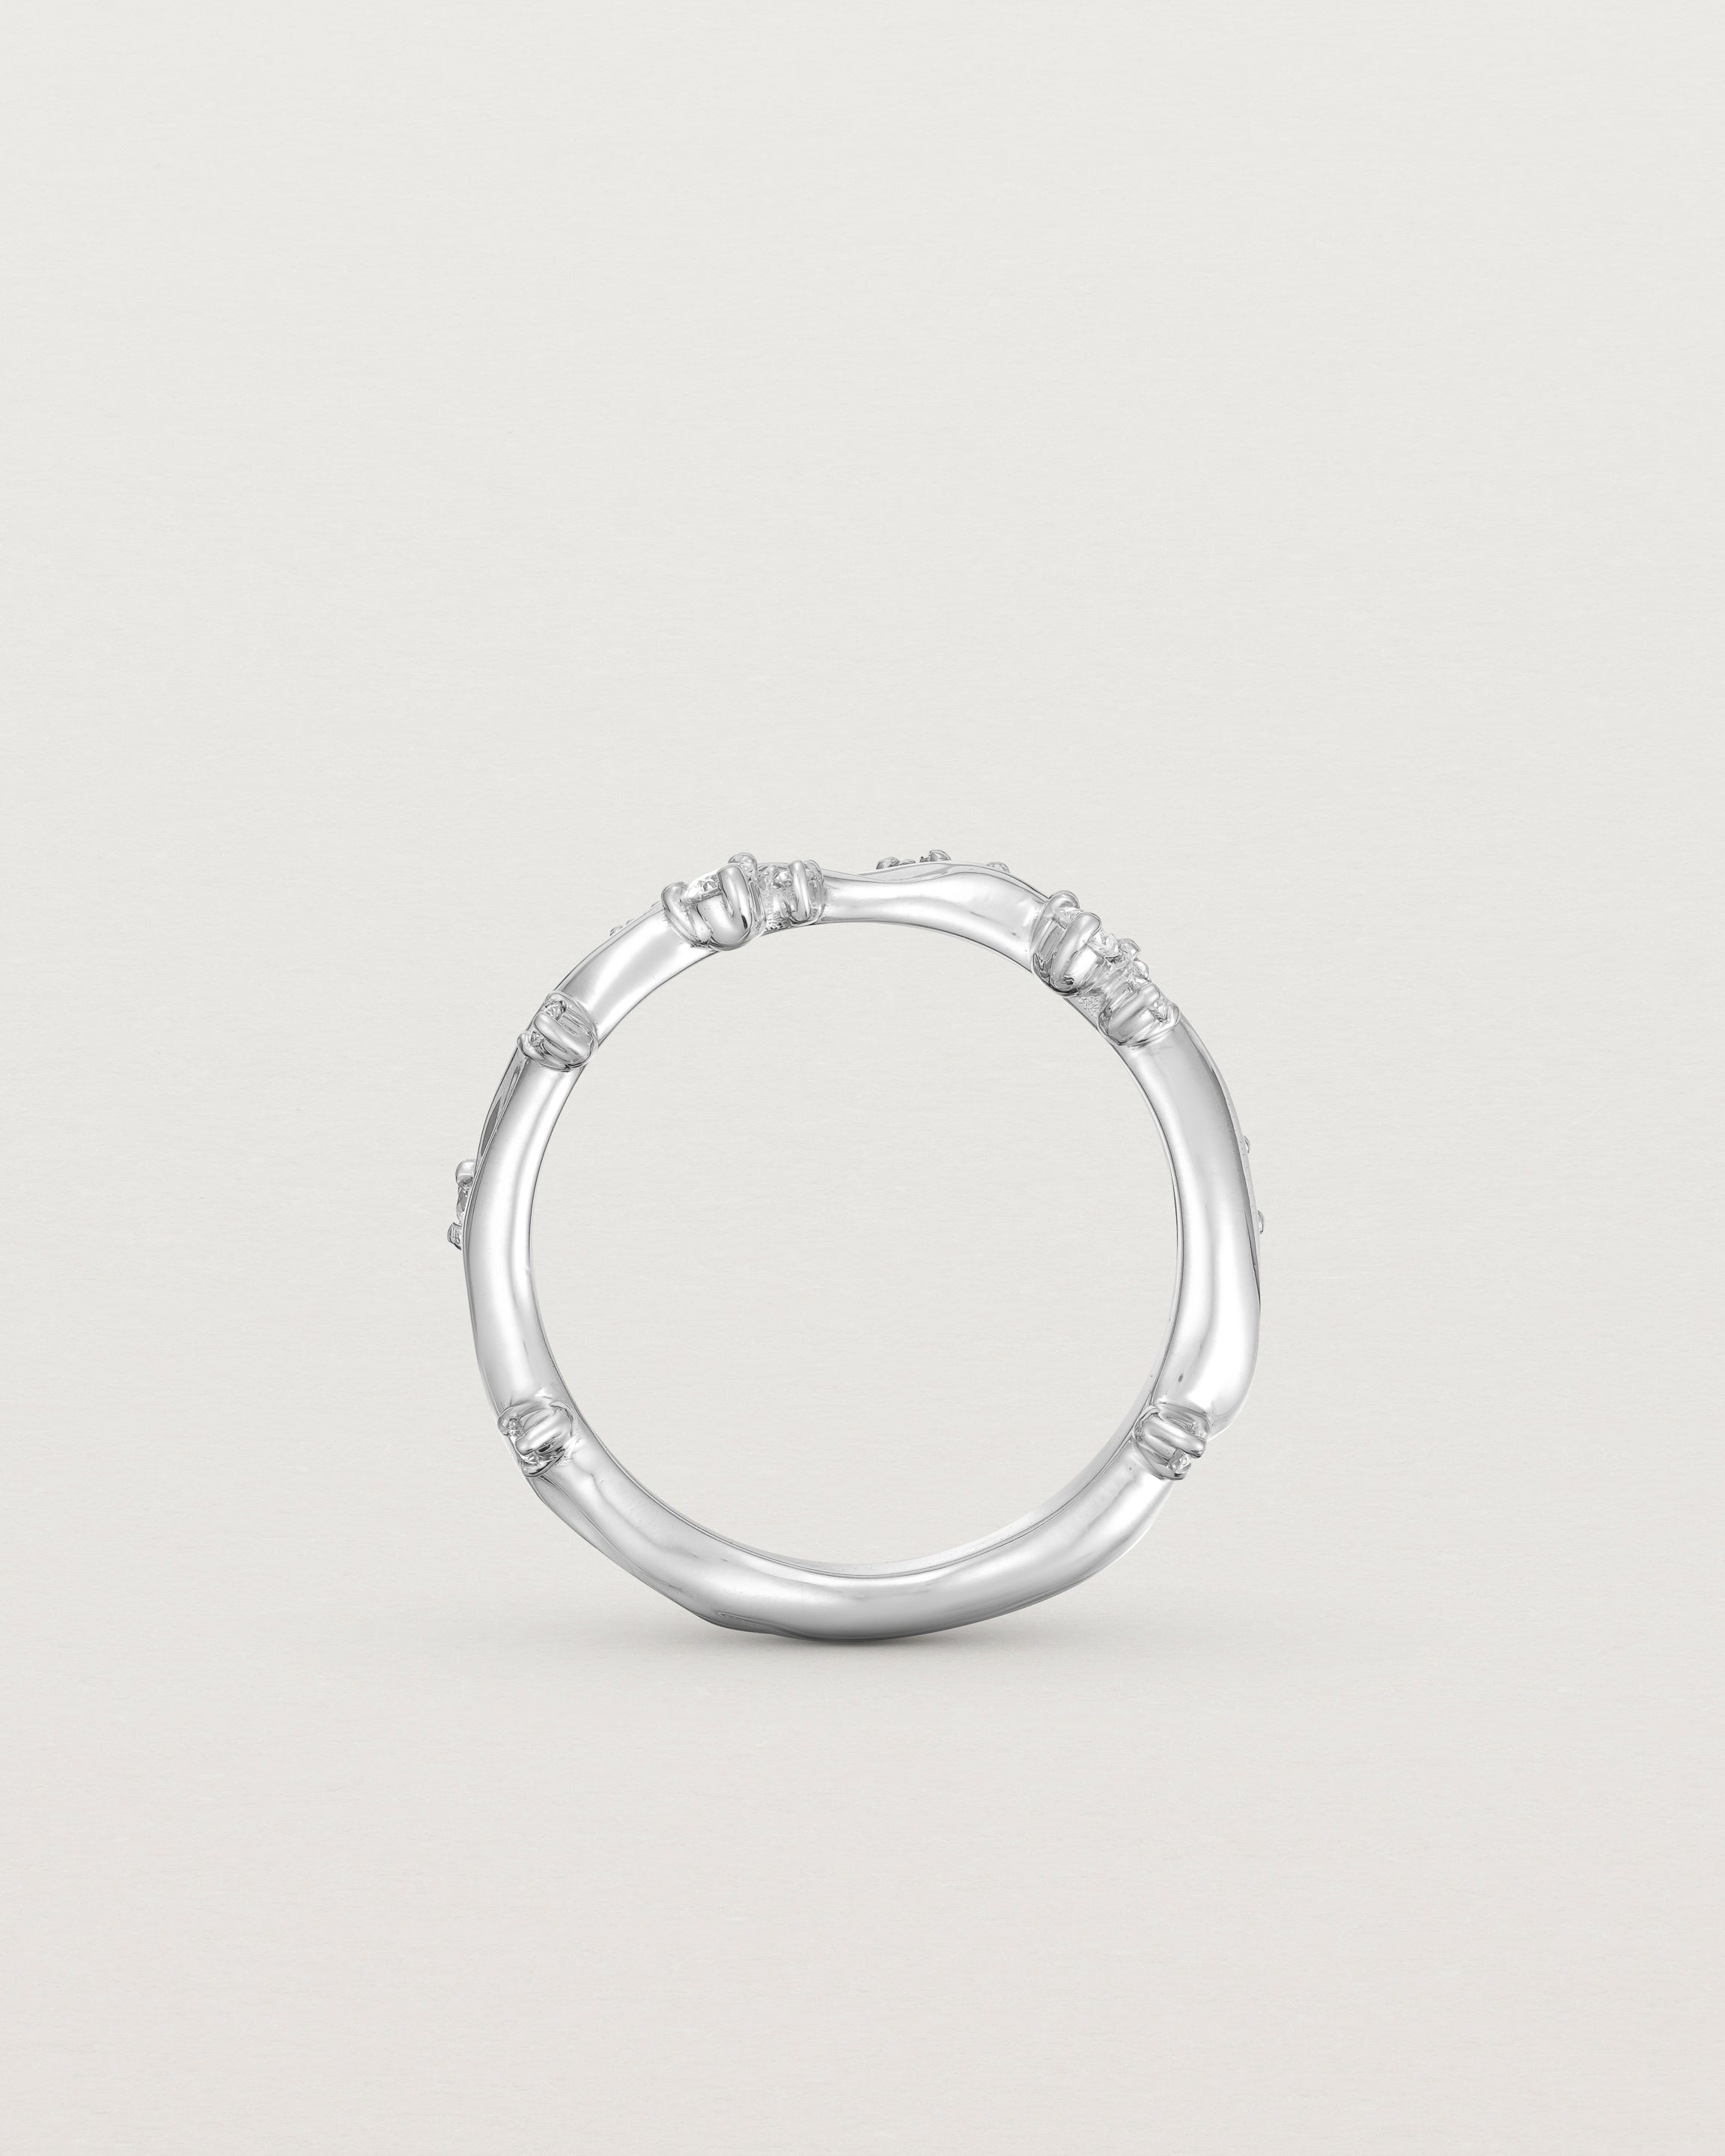 Standing image - Product photo of the white gold Ember ring with white diamonds scattered around the band.